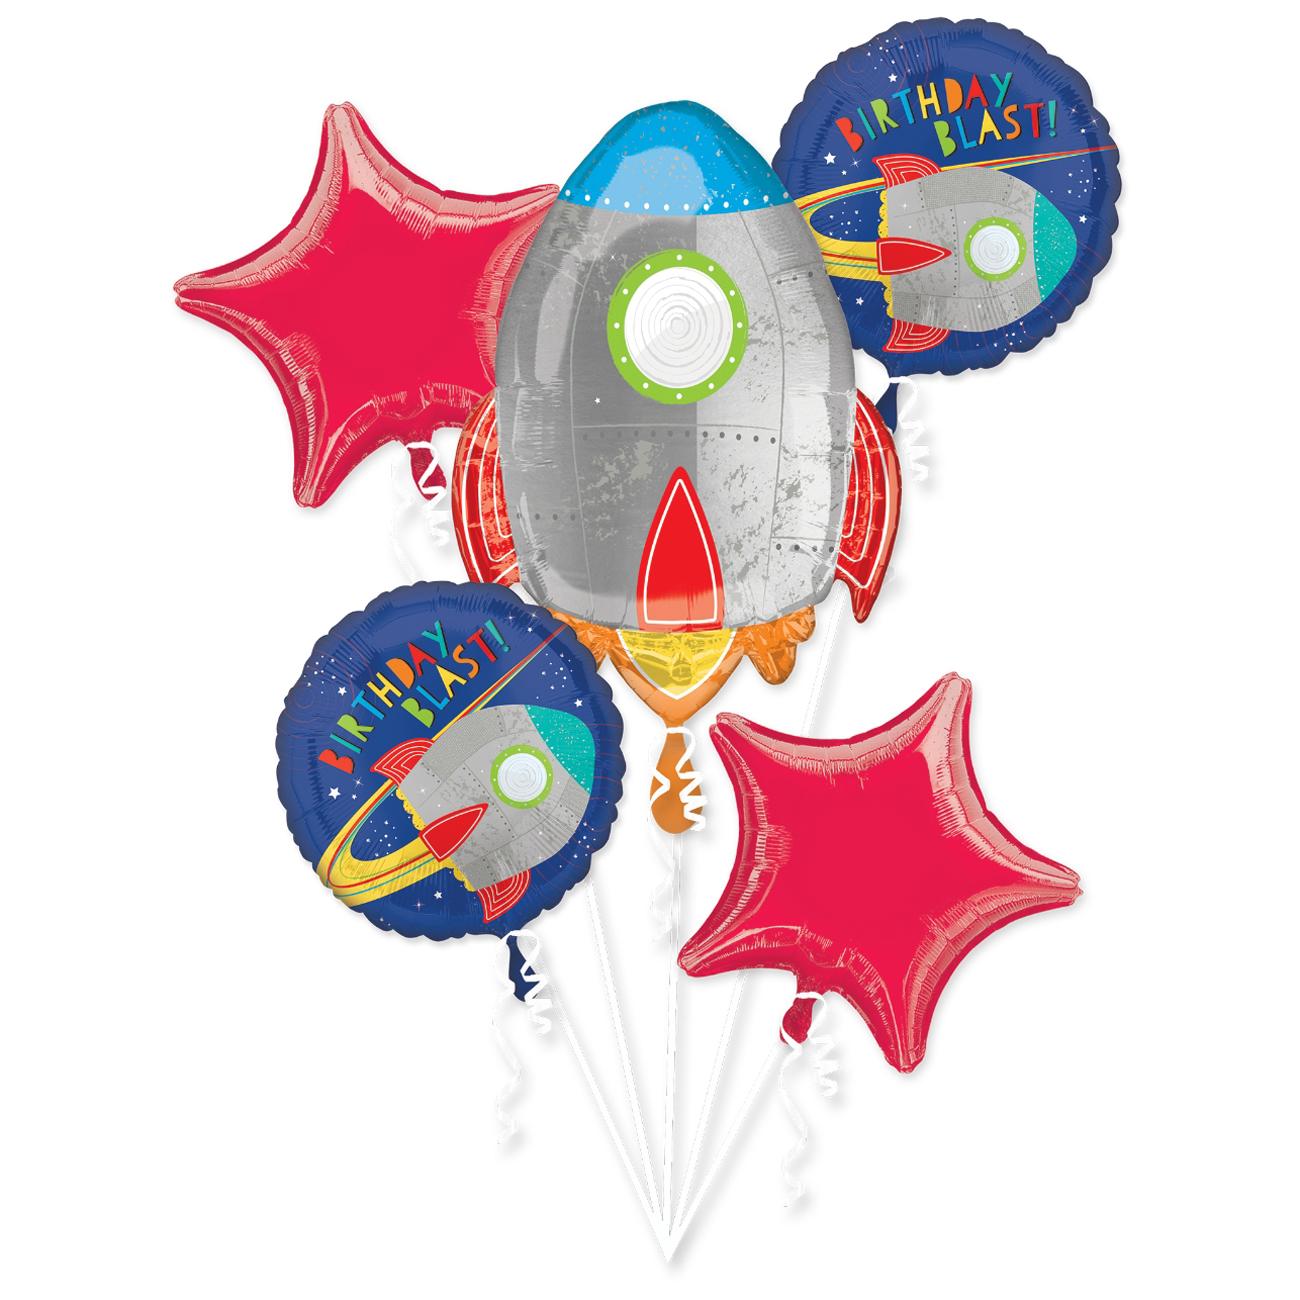 Blast off Balloon Bouquet 5pcs Balloons & Streamers - Party Centre